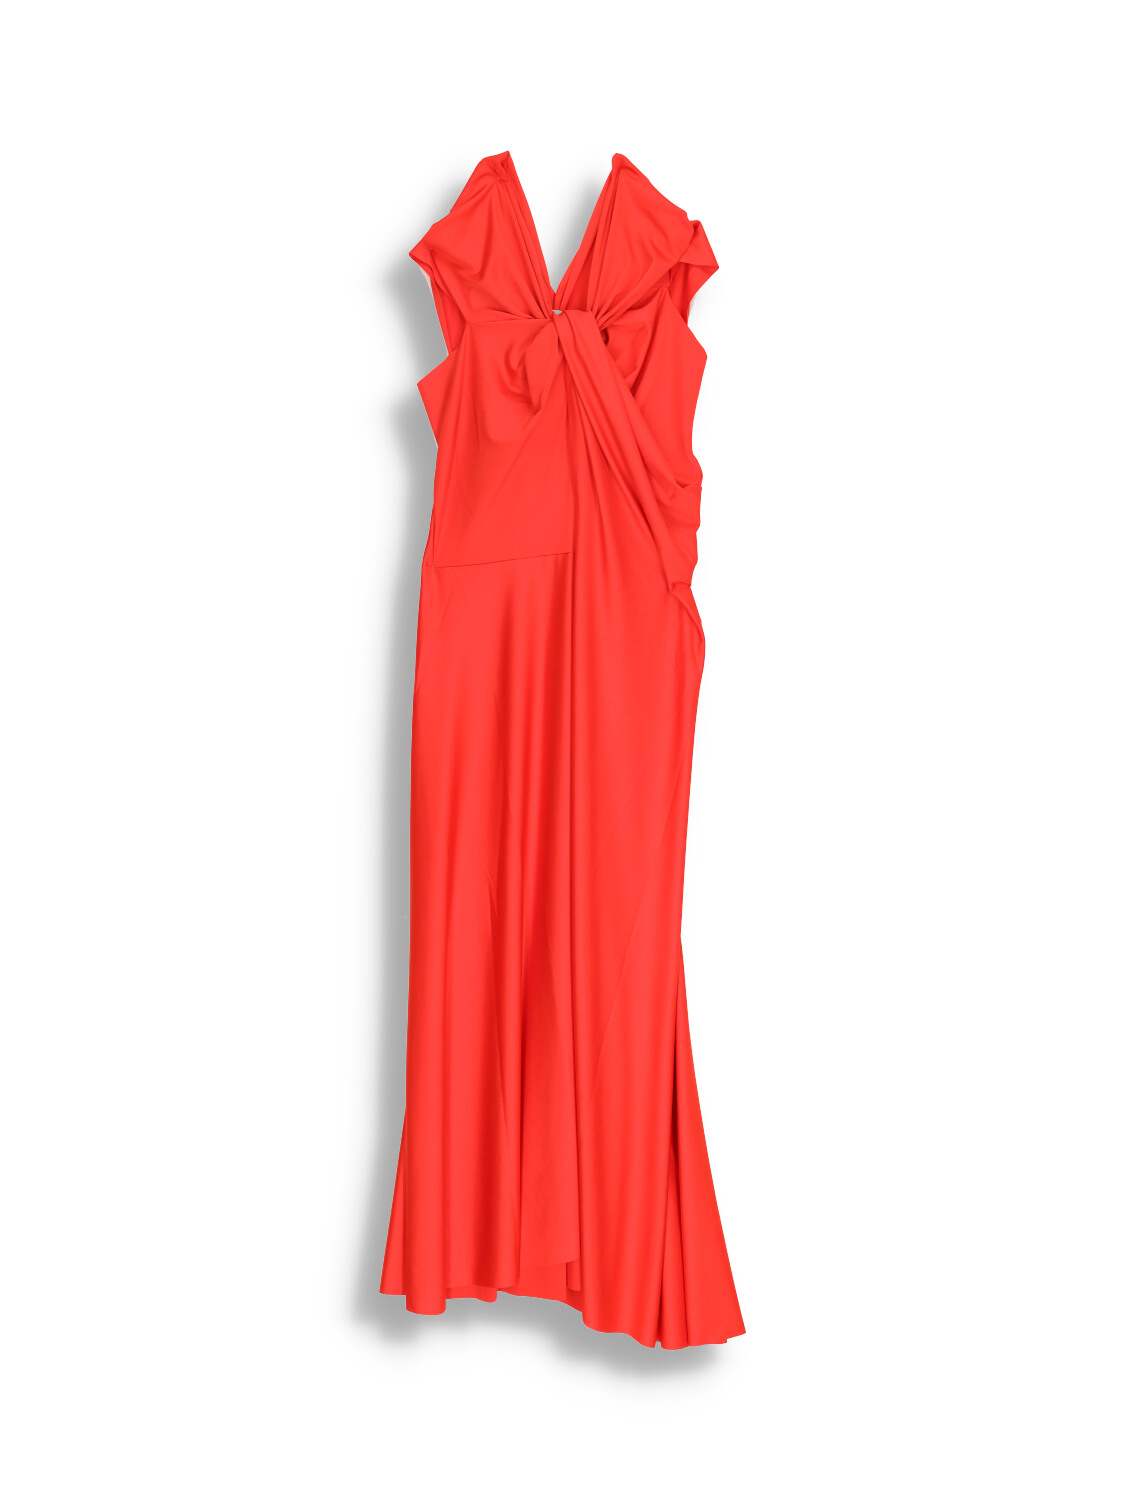 Victoria Beckham Sleeveless midi dress with knotted neckline detail red 38